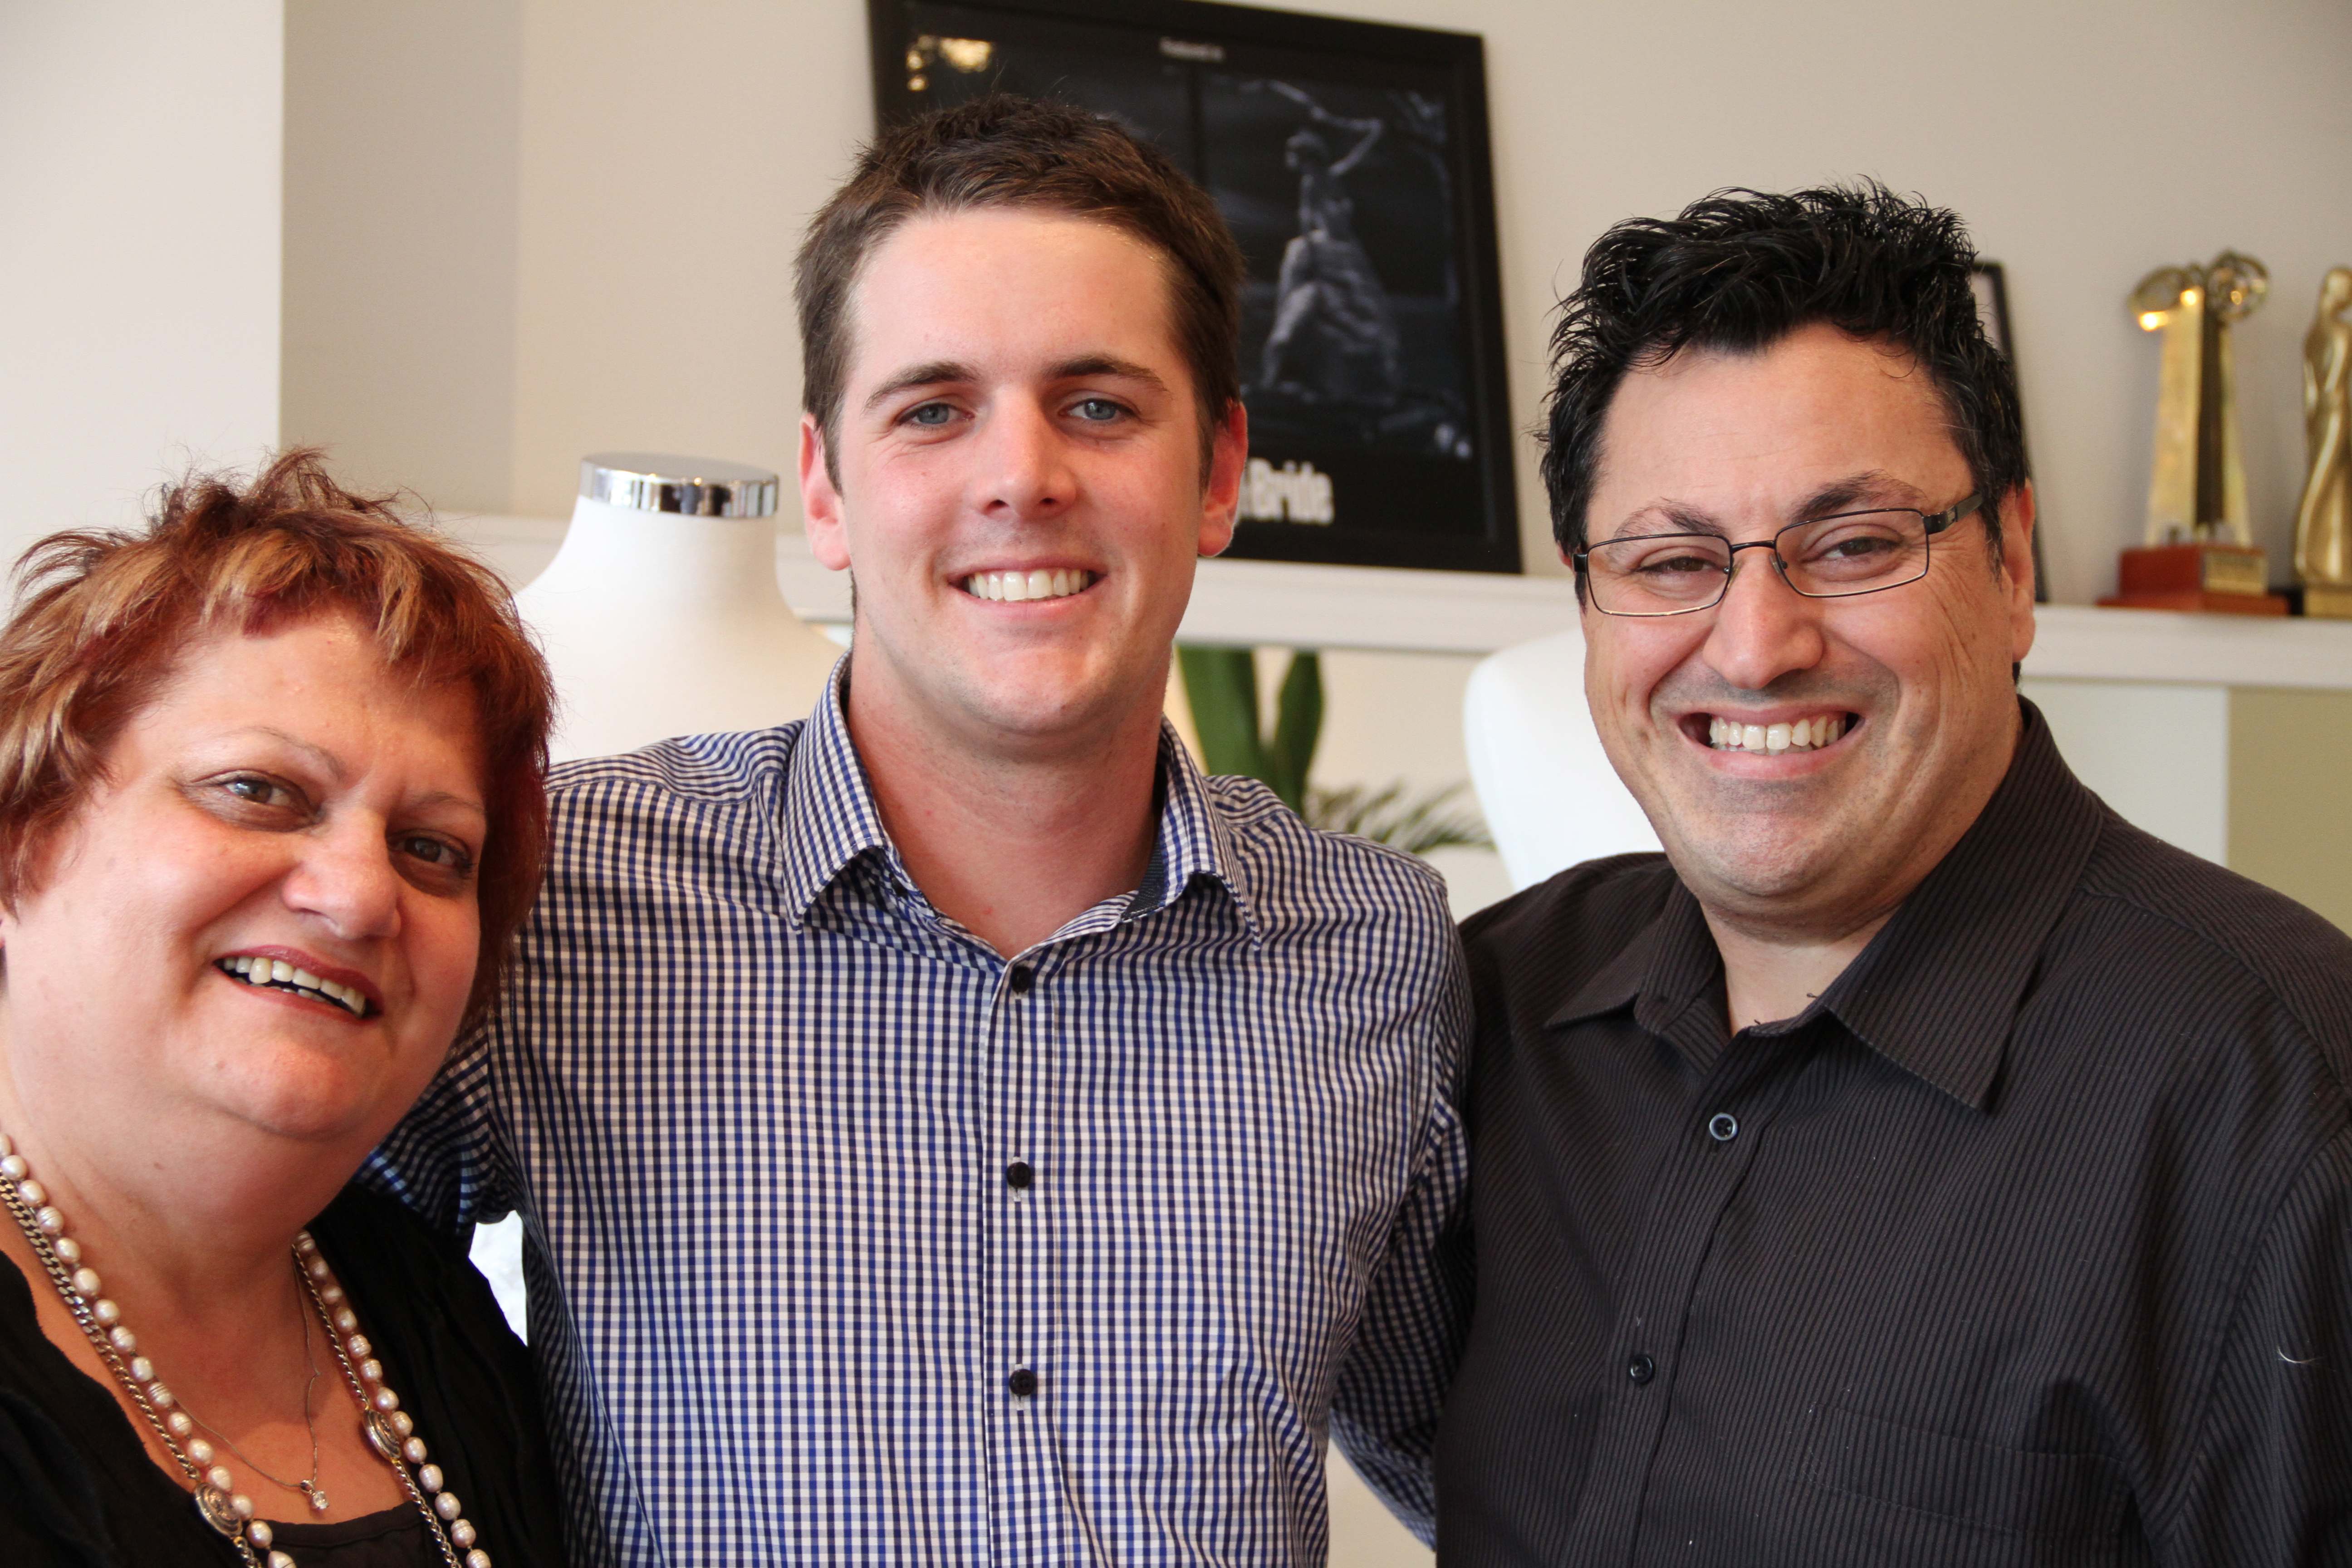 Brent NIcholls with wedding gown designers Ines Colosimo and Mario Croce from Meet the Frockers